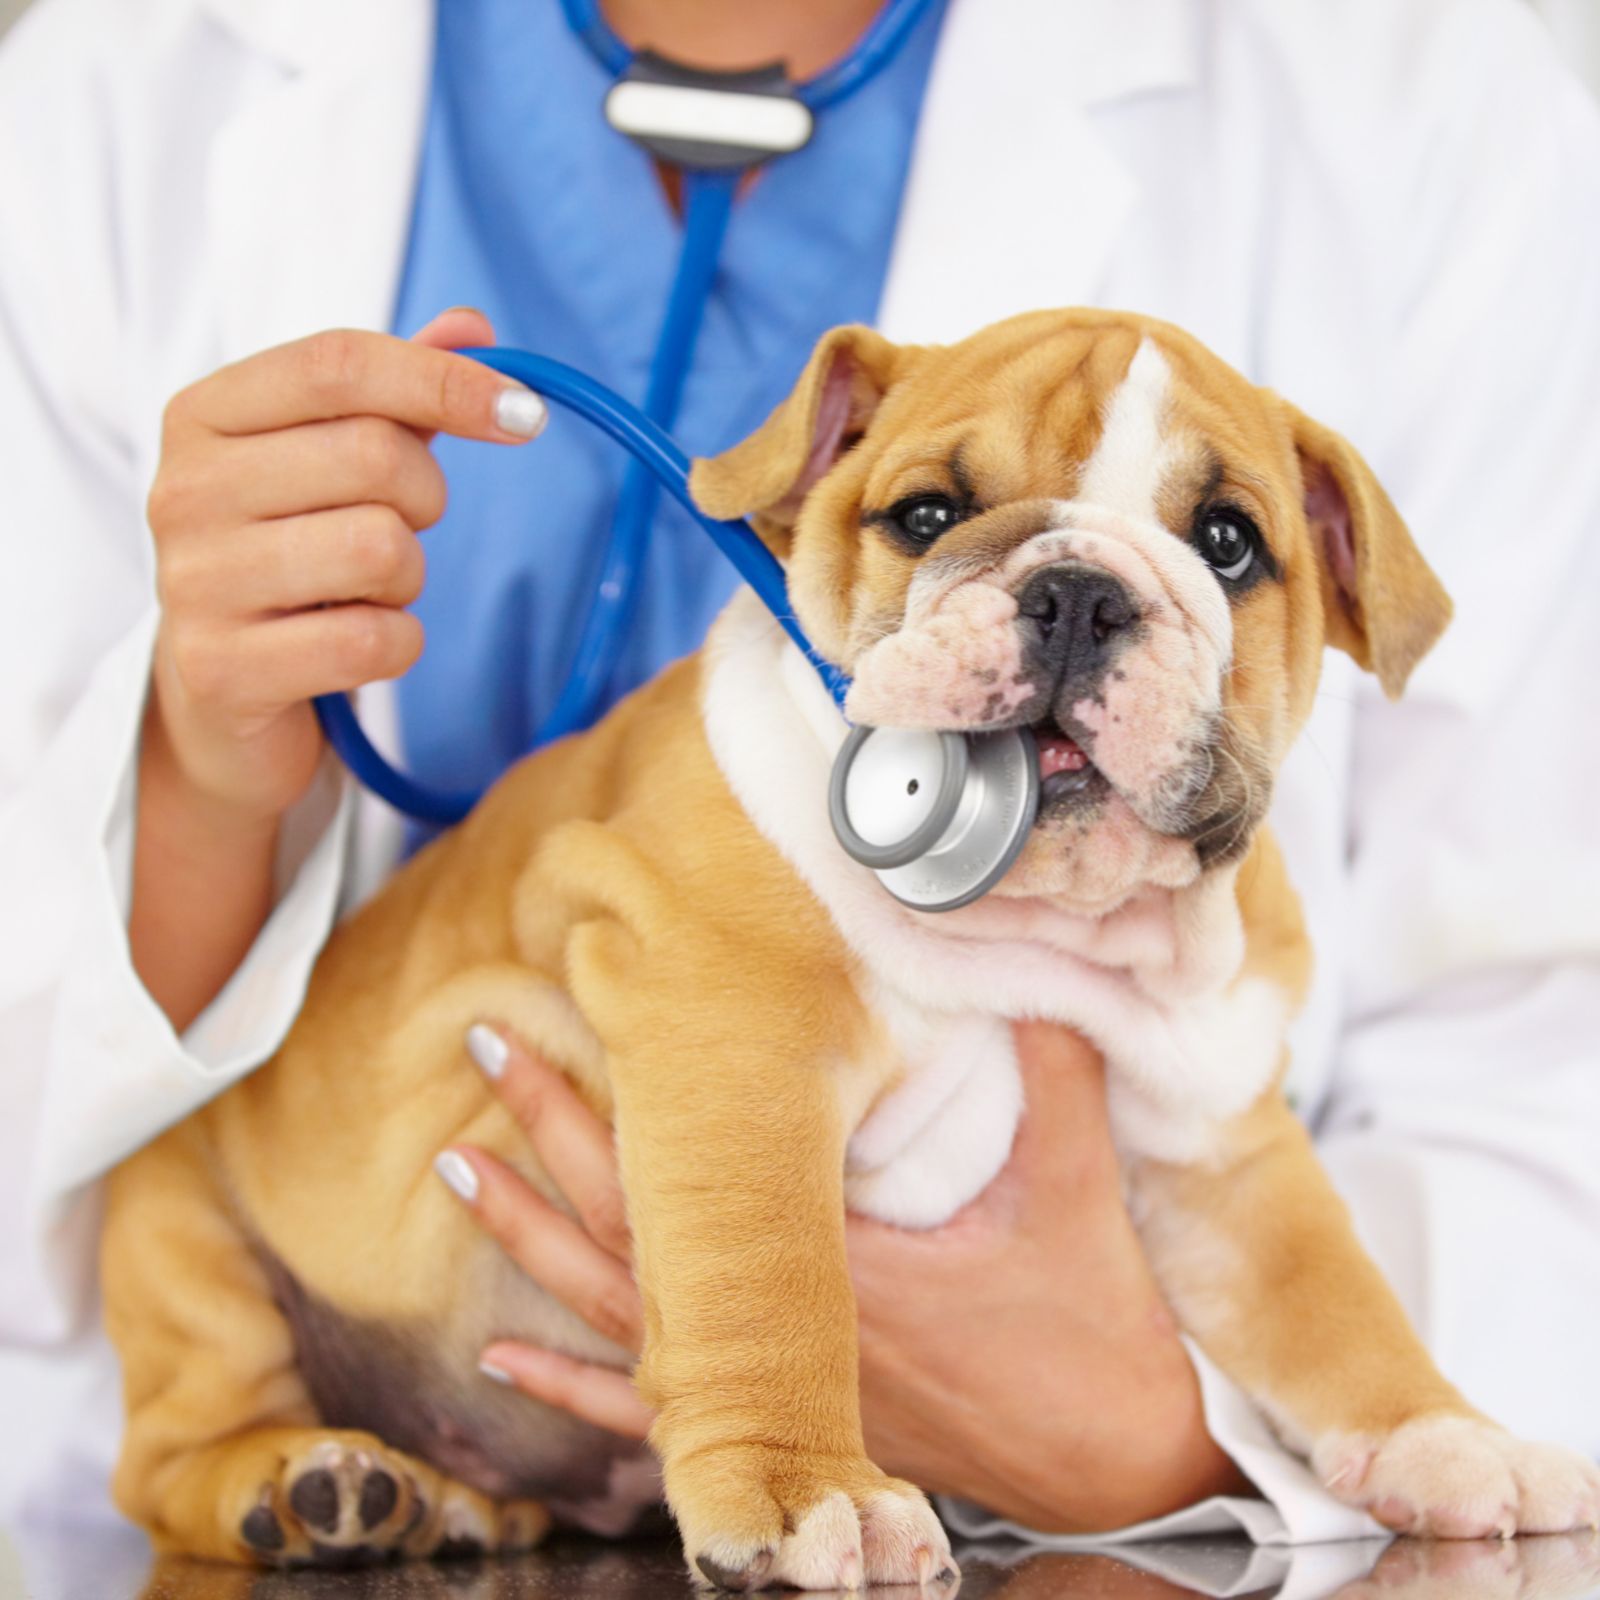 vet trying to listen to a bulldog puppy's heartbeat